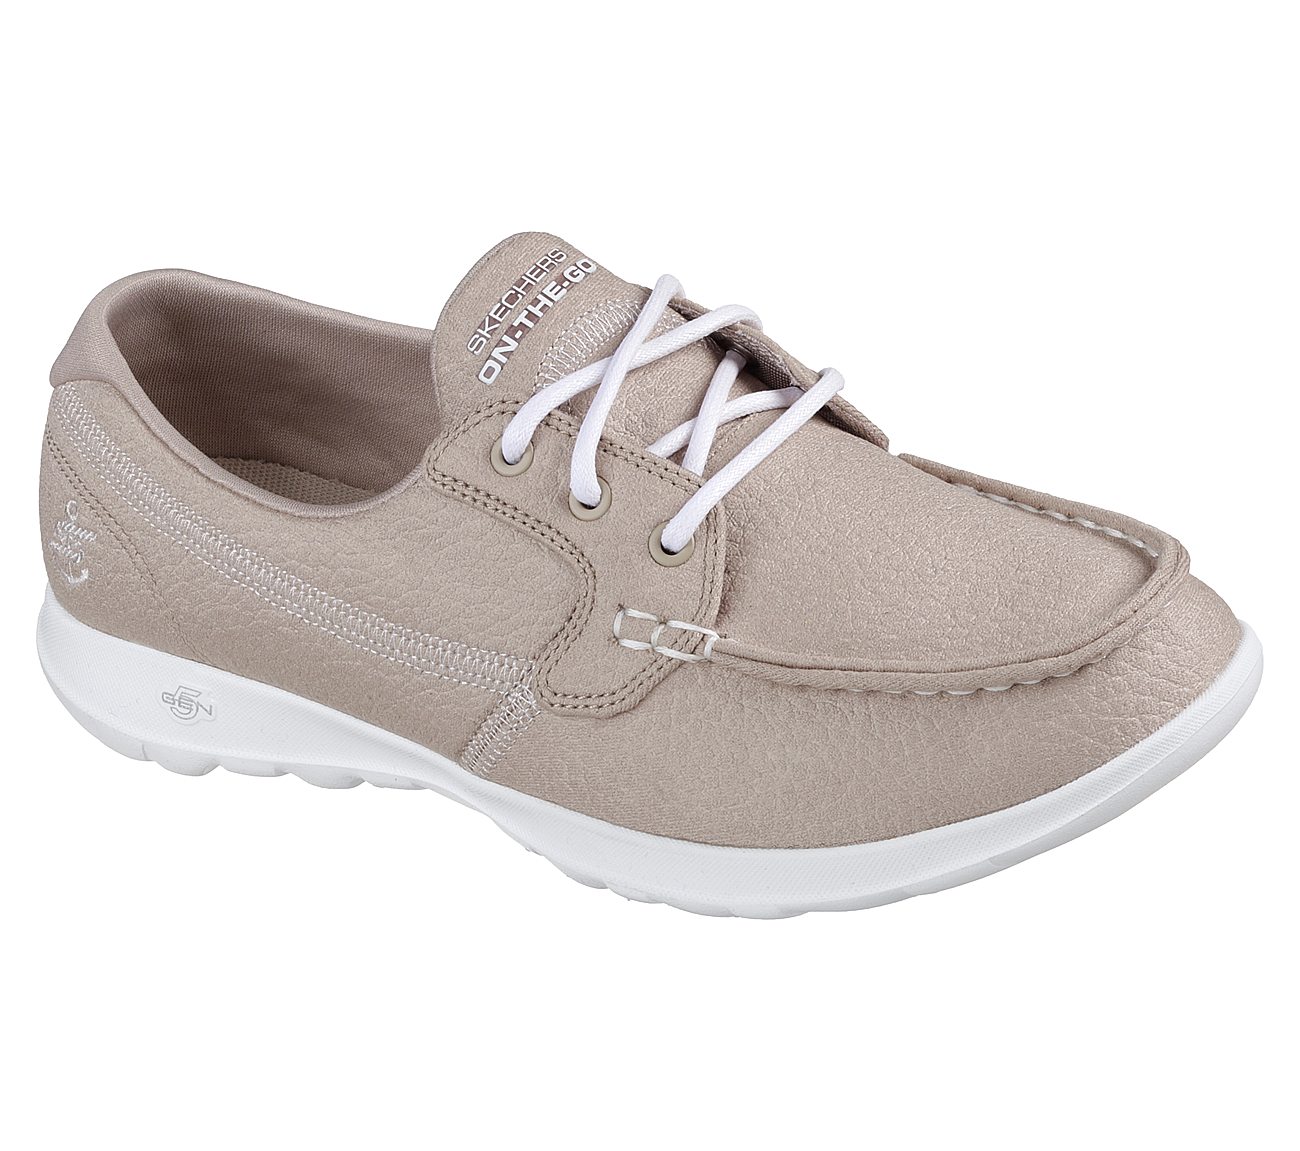 skechers on the go lace-up lightweight boat shoes